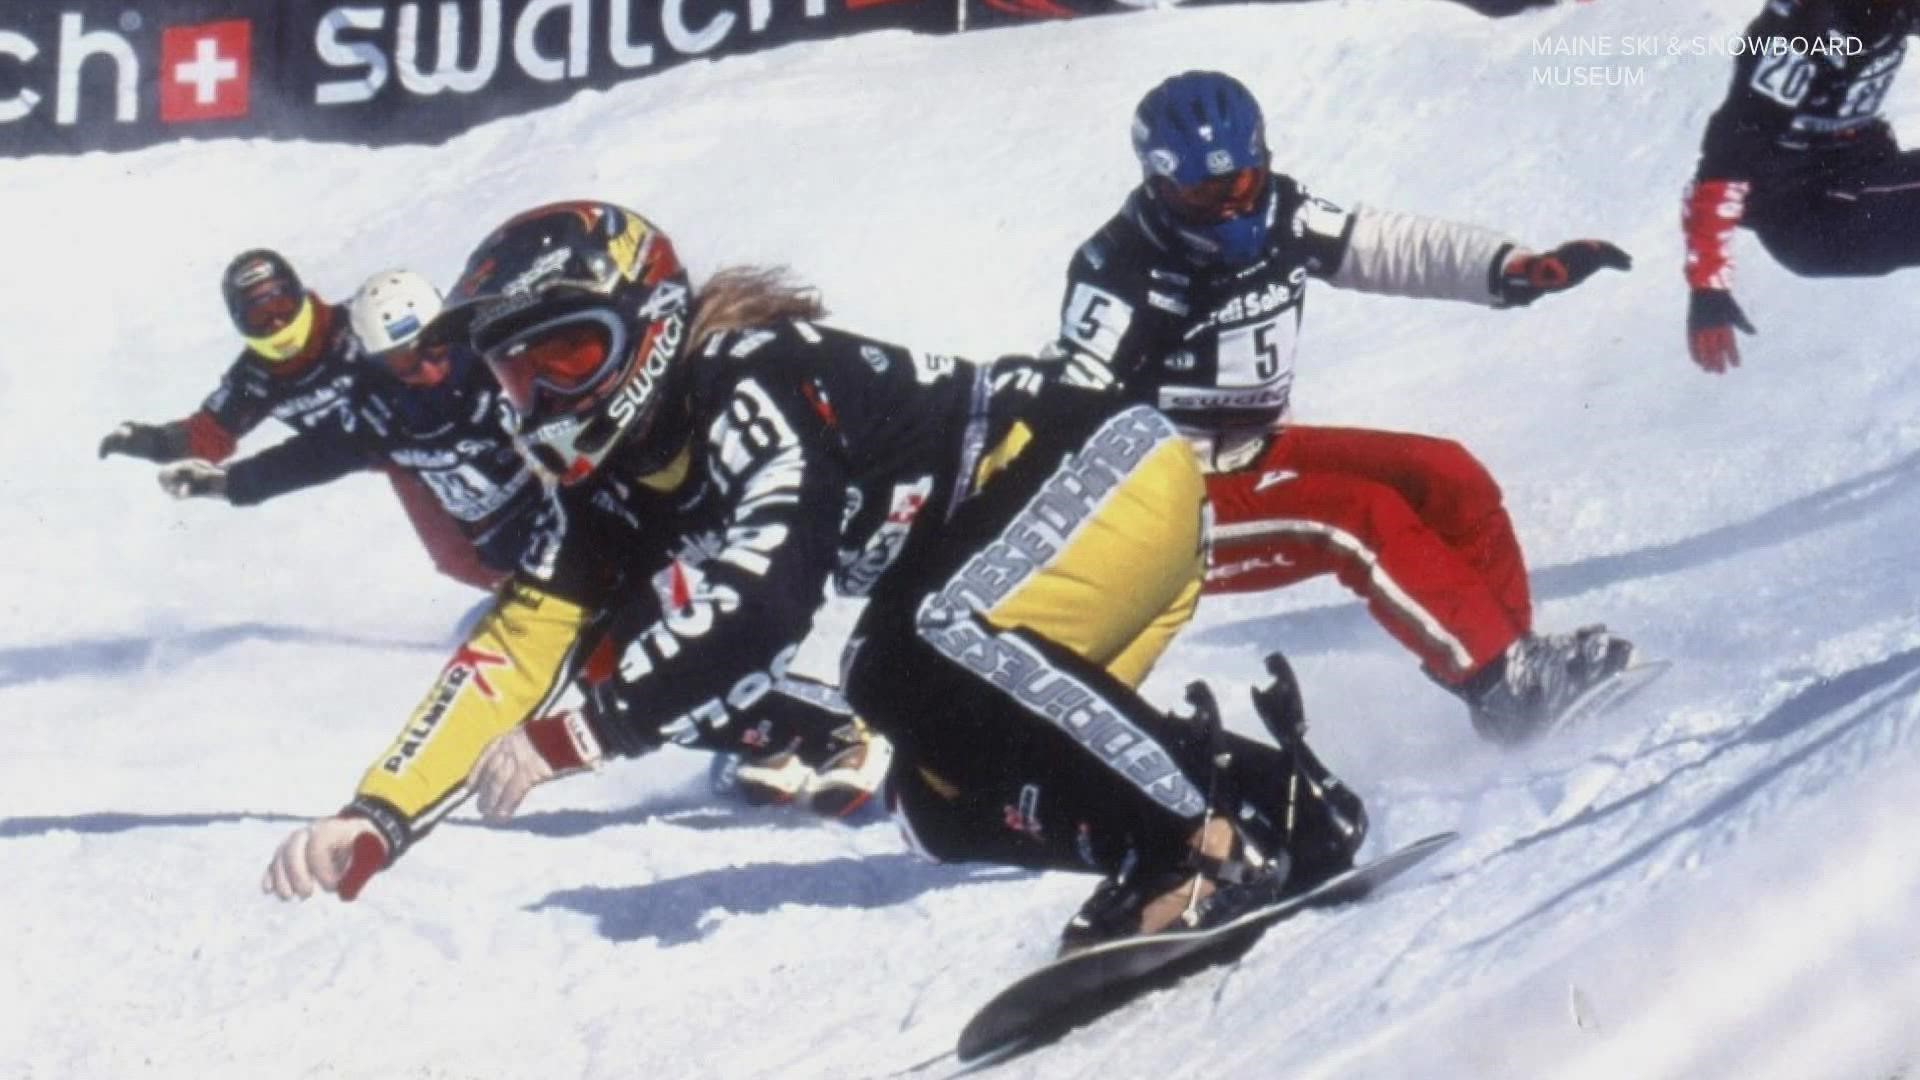 Glenn Parkinson of the Maine Ski & Snowboard explores the women who have furthered the sport of skiing and snowboarding in the last Cocoa Chronicle lecture.